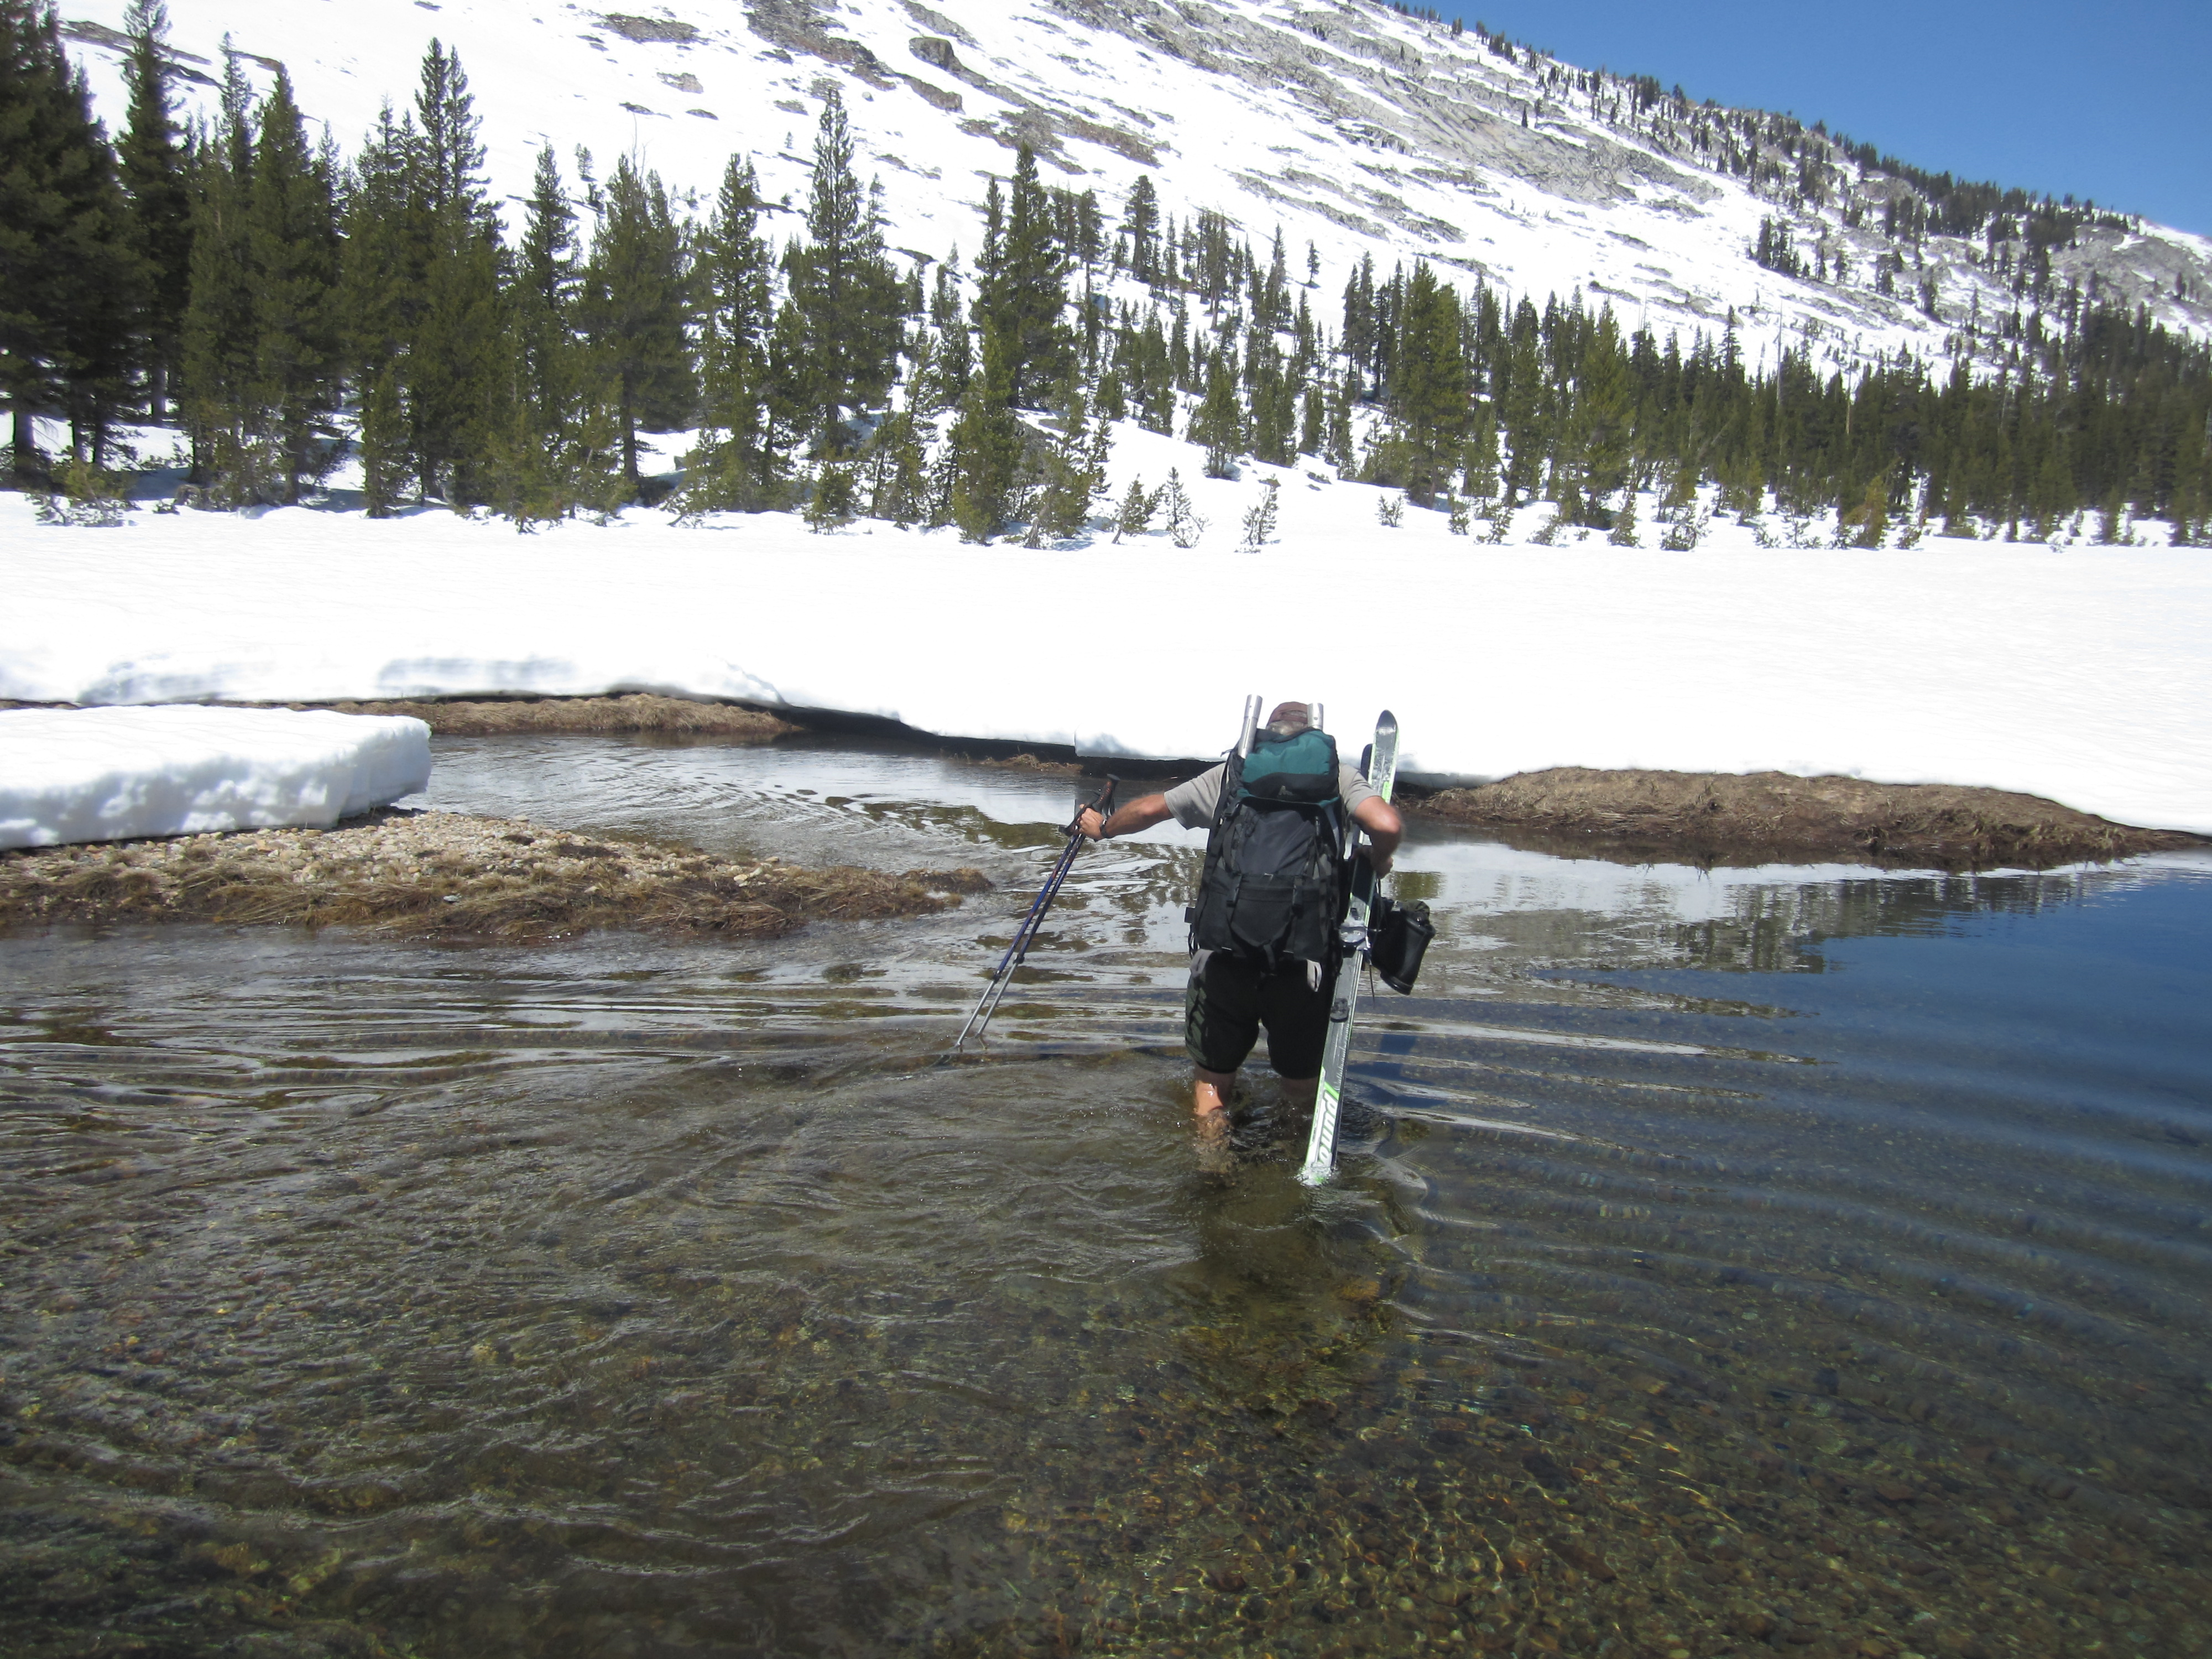 Man with skis tied to pack wades a flowing river in a snow-covered meadow, wearing shorts.